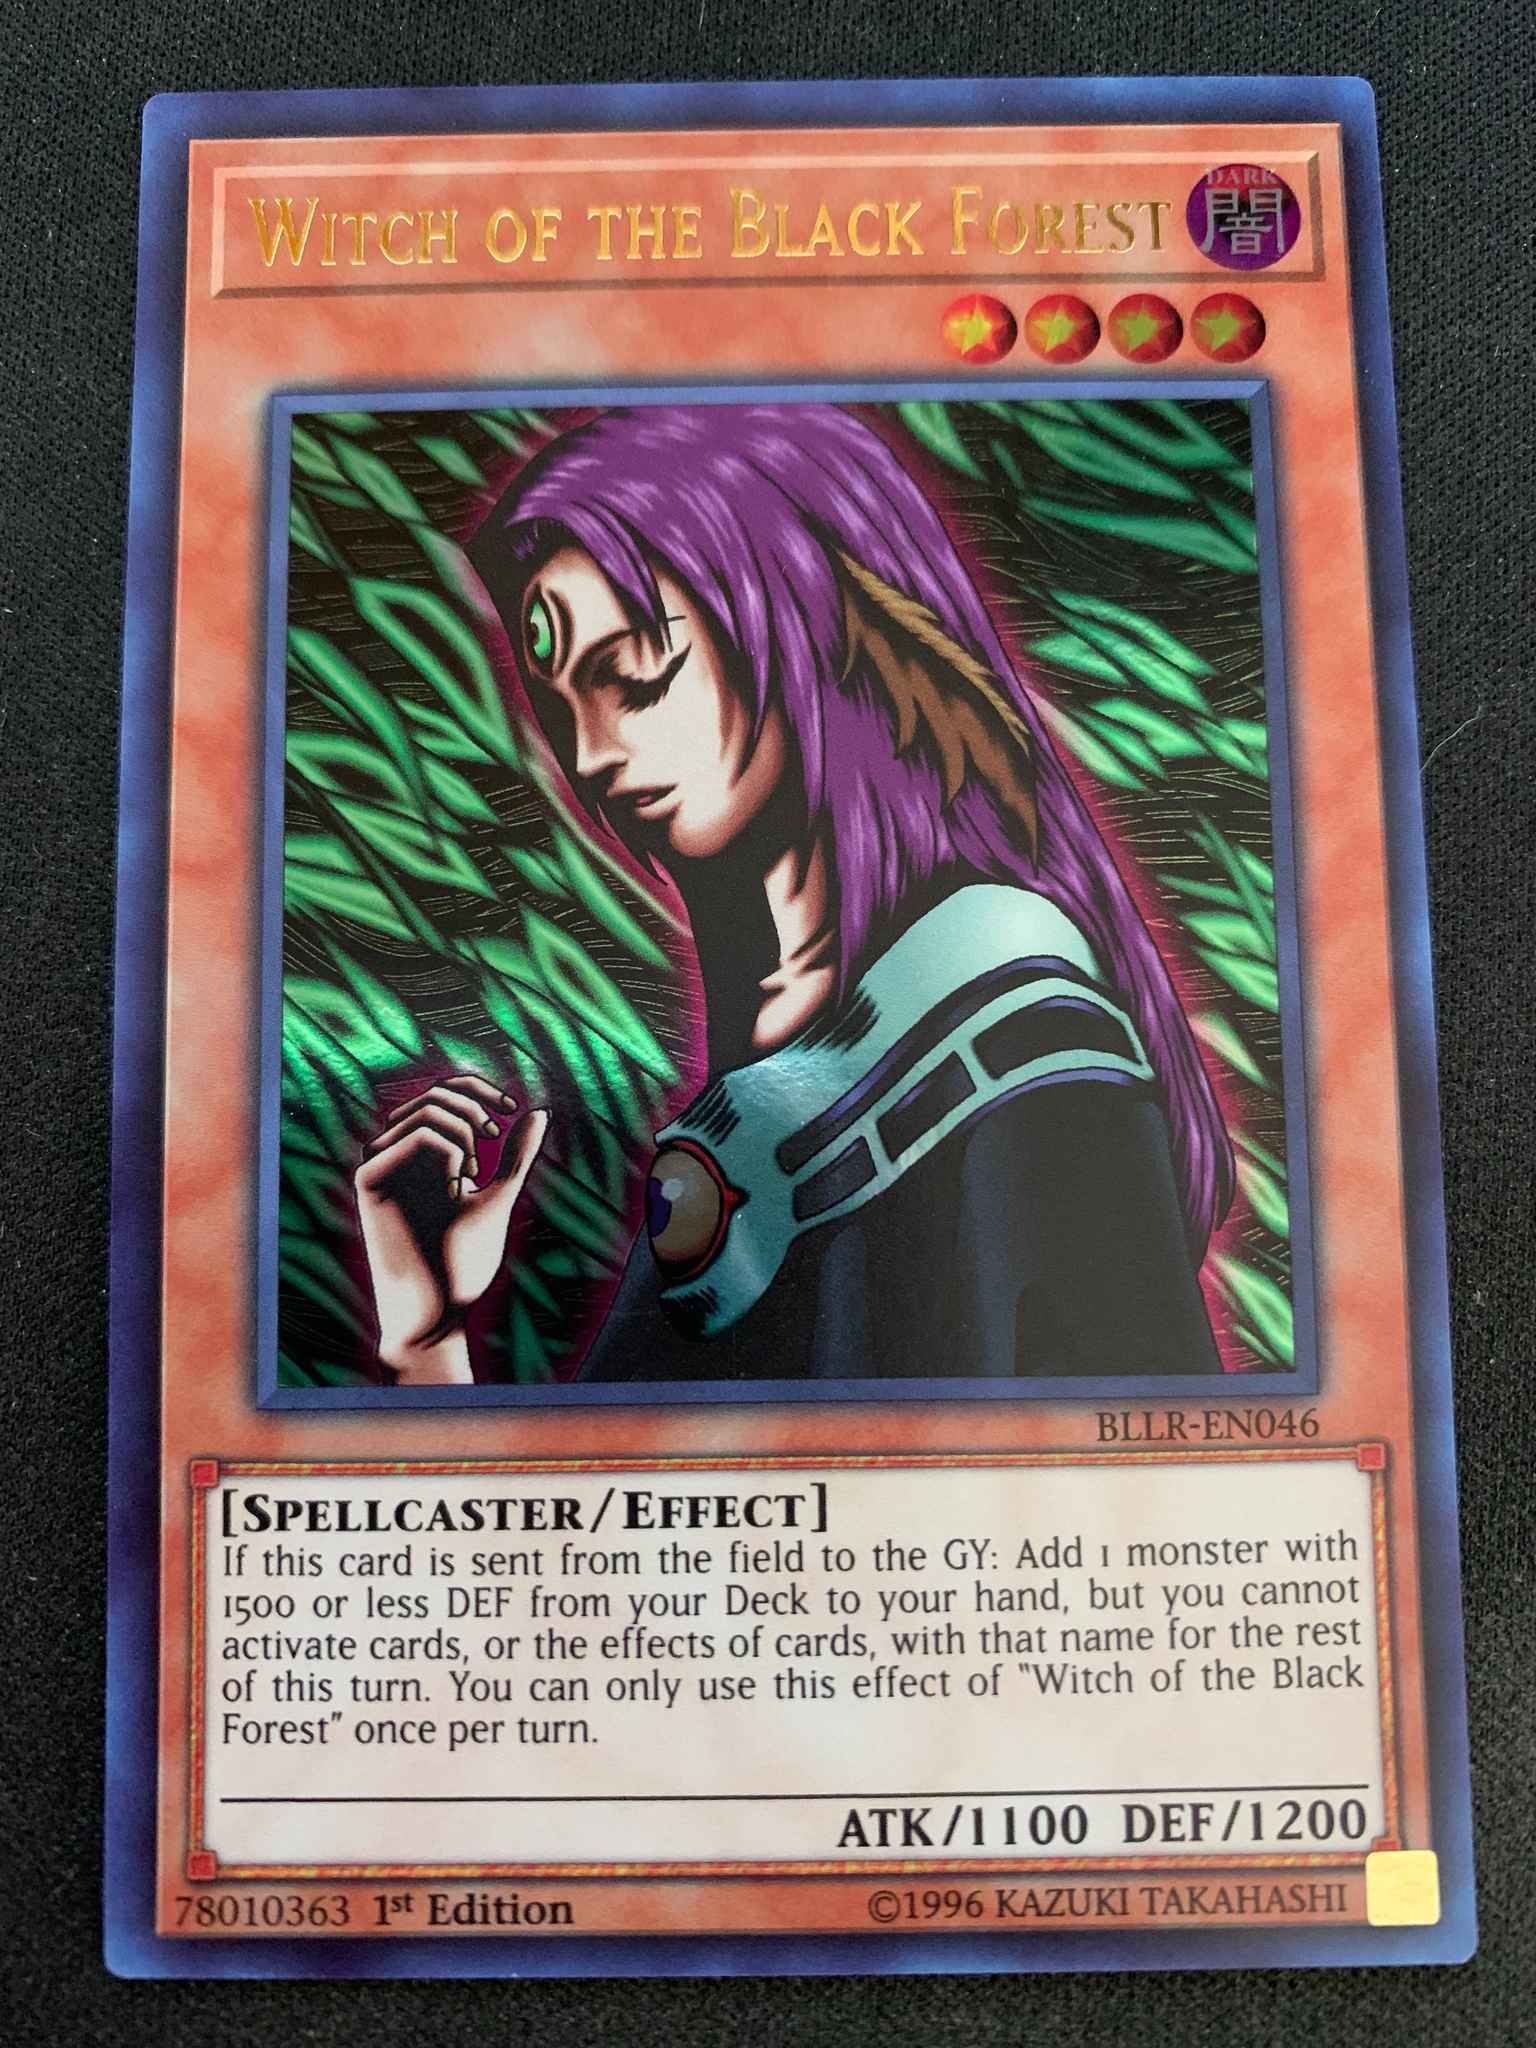 Ultra Rare 1st Ed NM BLLR-EN046 Witch of the Black Forest YUGIOH 